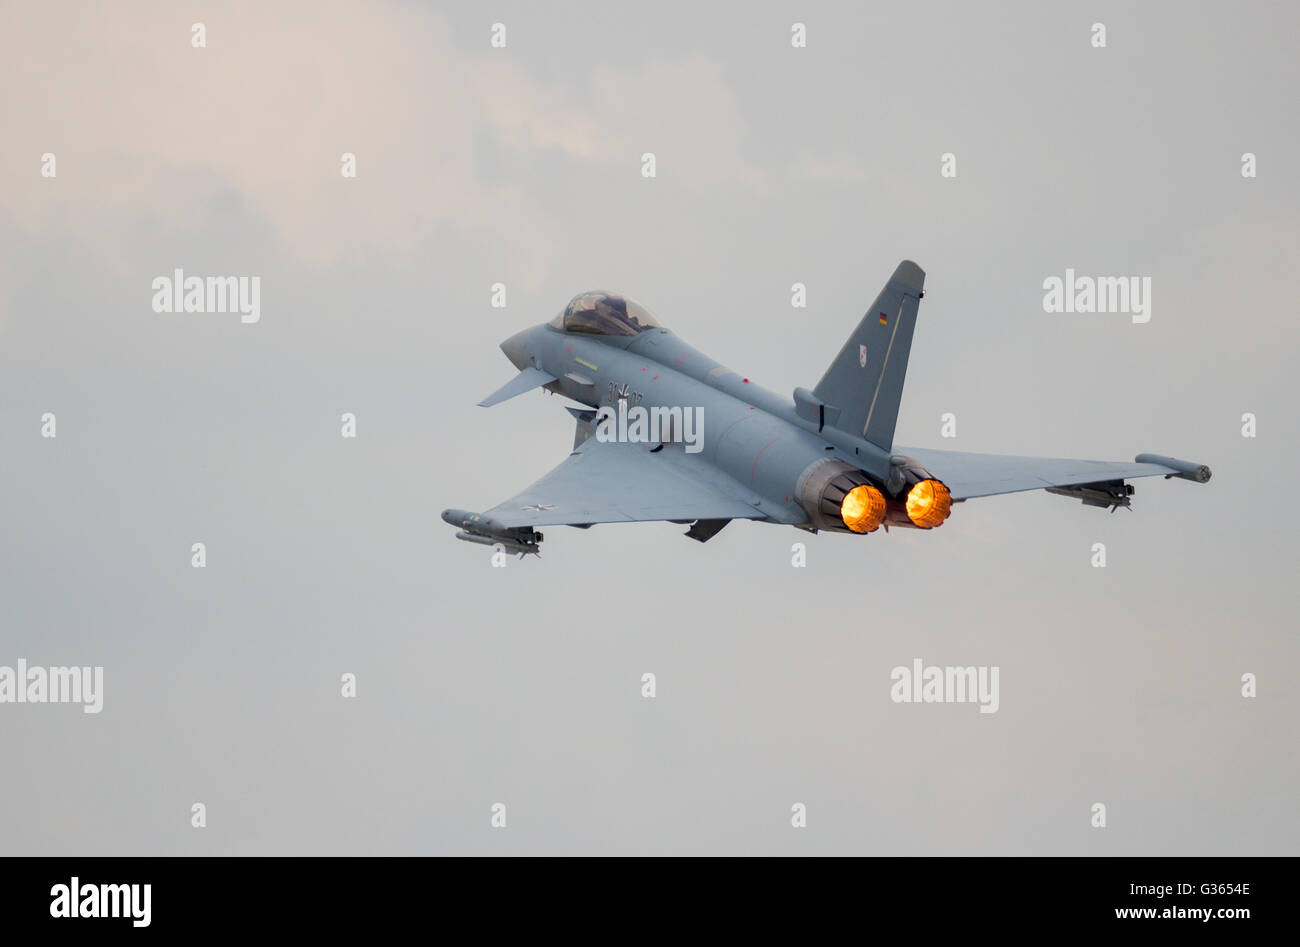 German Air Force Eurofighter Typhoon afterburner take off from Berlin-Schoneveld airport. Stock Photo